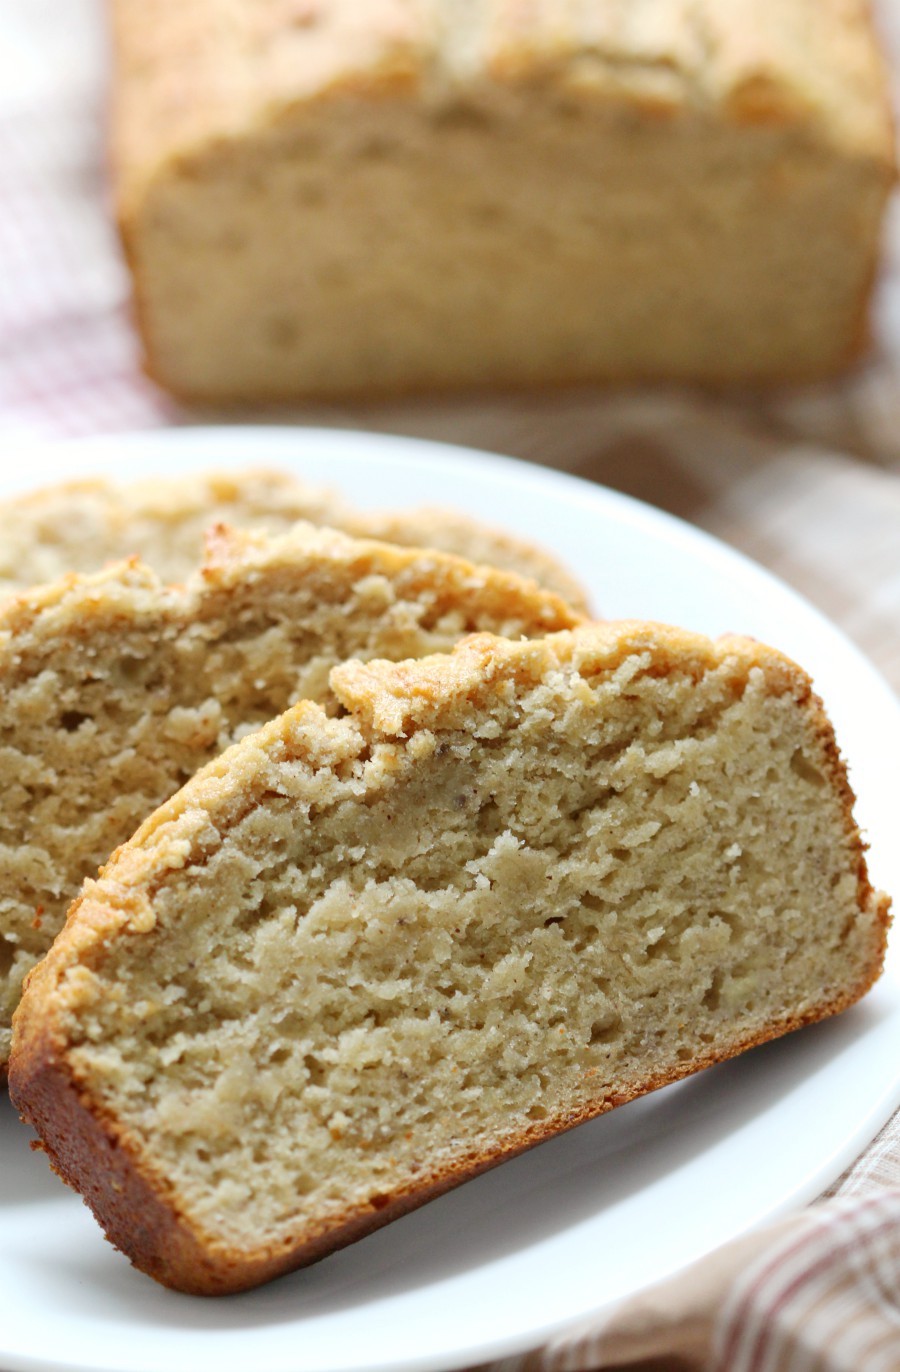 Classic Gluten-Free Banana Bread (Vegan, Allergy-Free) | Strength and Sunshine @RebeccaGF666 There is nothing like a warm slice of homemade banana bread! This Classic Gluten-Free Banana Bread recipe is vegan, allergy-free, soft & moist, and perfect for breakfast, brunch, or a snack! It's 8 ingredients, high protein, sugar-free, oil-free, and can even be made paleo & grain-free!